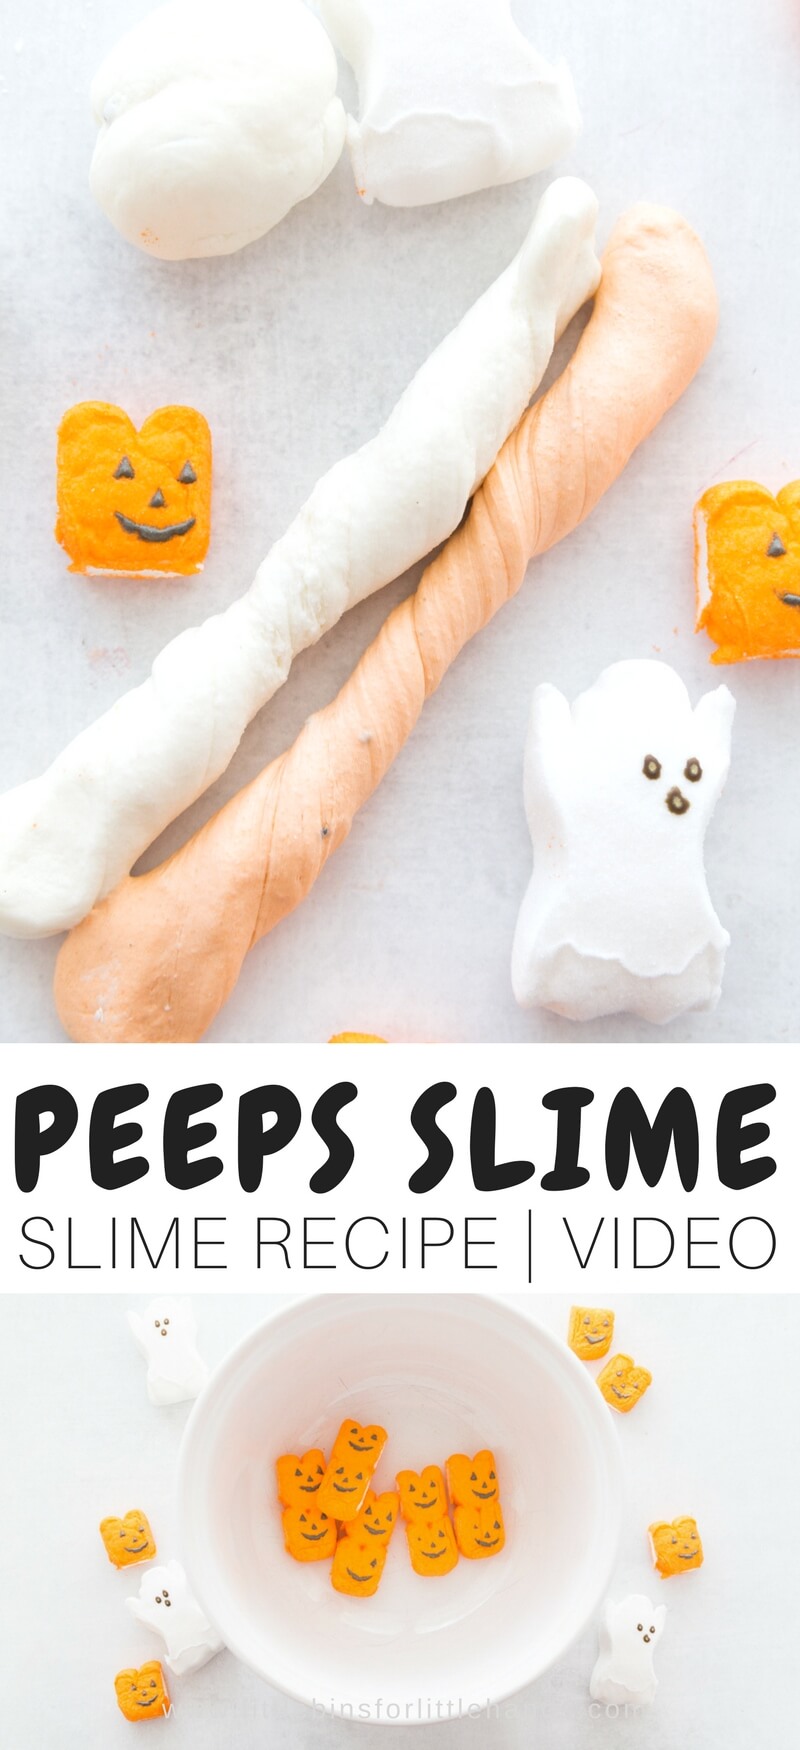 Halloween slime recipe using peeps. Peeps Halloween slime recipe is a must try activity with the kids this fall. Make taste safe slime or candy slime with a simple recipe that is a great alternative to our classic slime recipes. Make sure to check out all our Halloween slime recipes including fluffy slime, saline slime, liquid starch slime, and borax slime too.